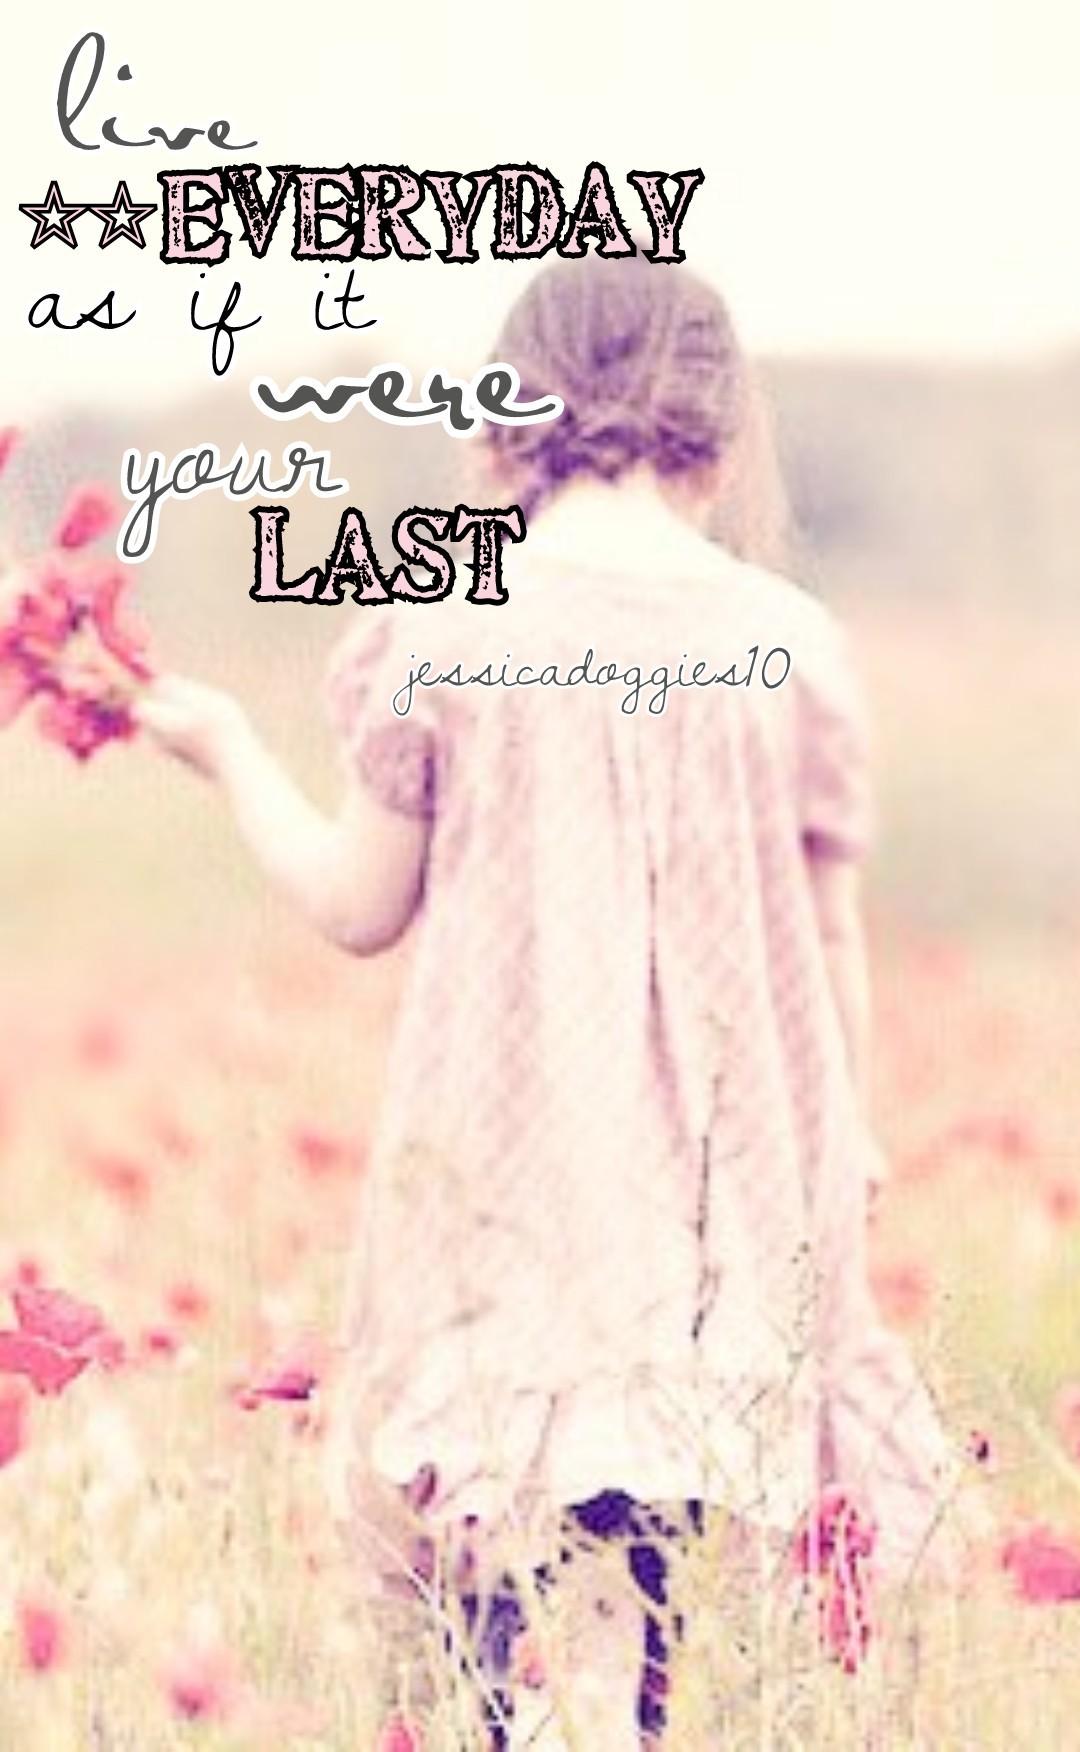 Live everyday as if it were your last.